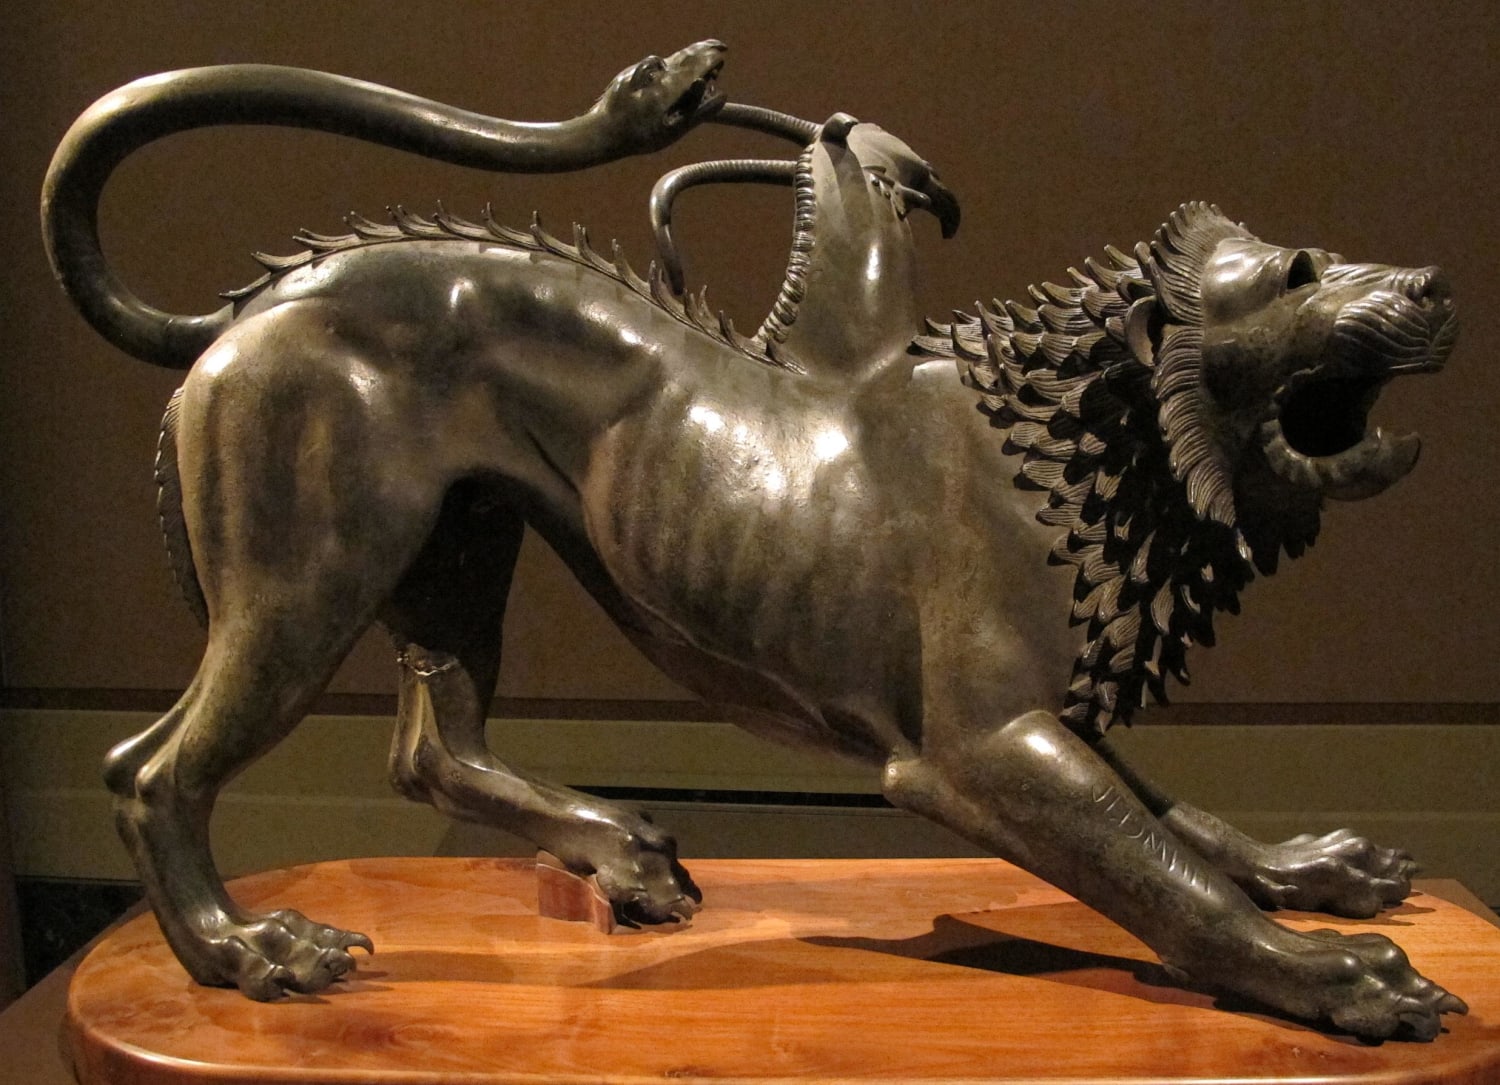 Etruscan bronze statue of the legendary monster, Chimera. Discovered at Arezzo, Tuscany and dated to ca. 400 BC. On the right leg is engraved a dedicatory inscription to Tinia. Length: 129 cm (50.7 in). National Archaeological Museum, Florence.